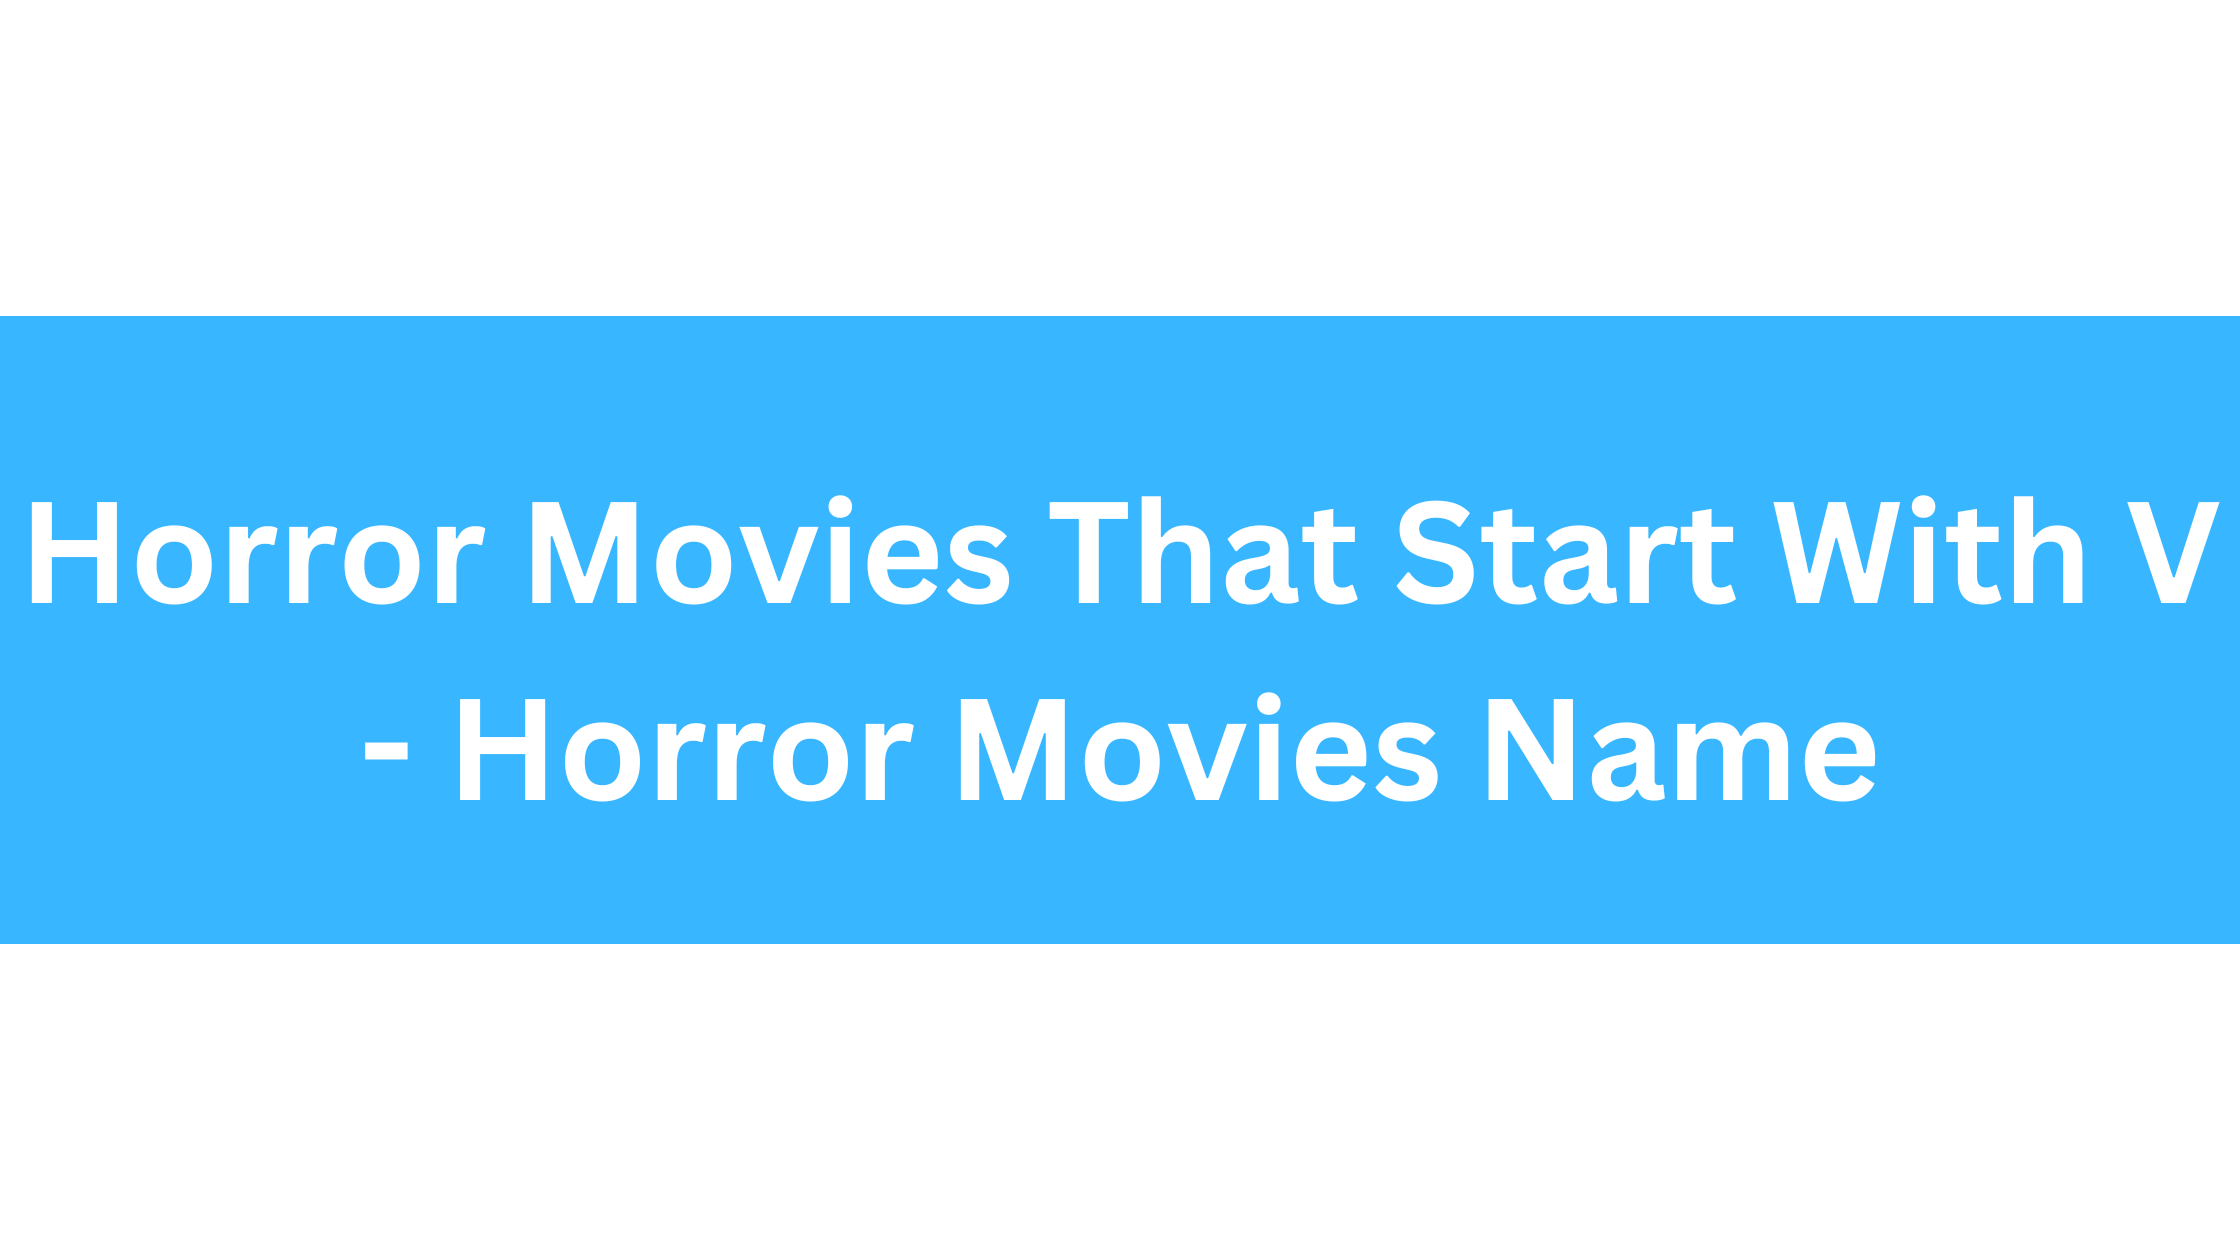 Horror Movies That Start With V